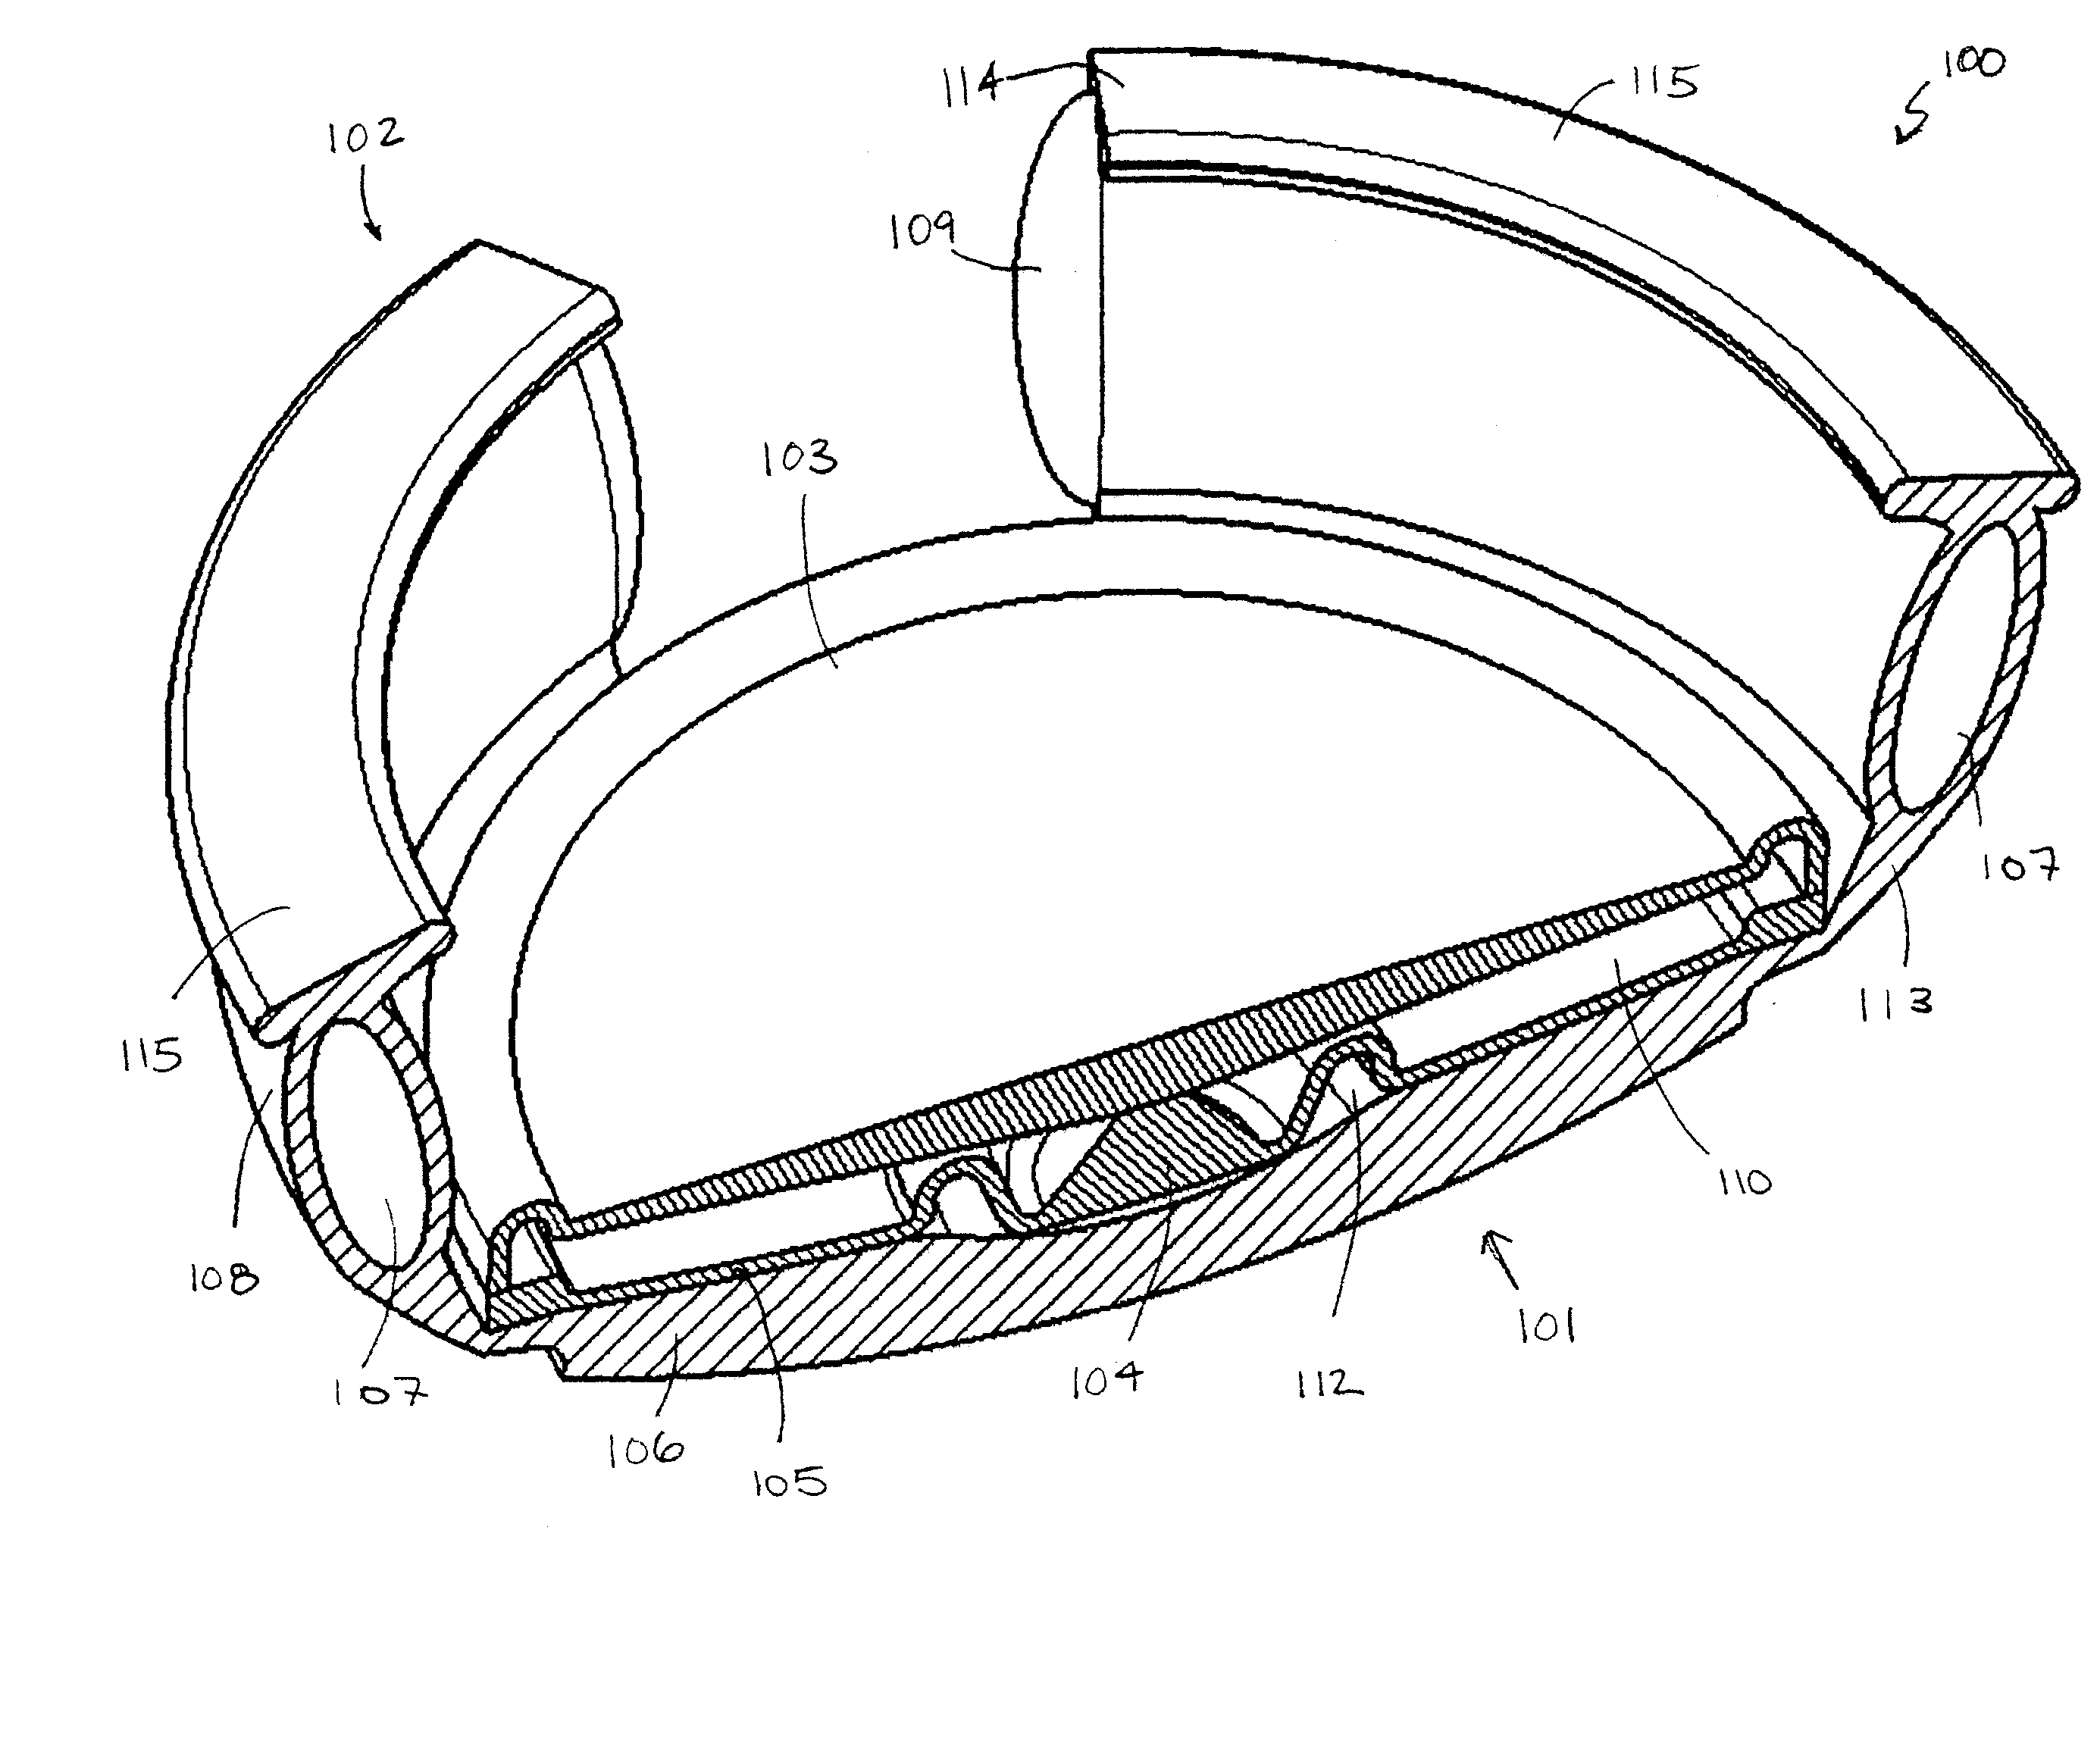 Accommodating Intraocular Lens System Having Spherical Aberration Compensation and Method